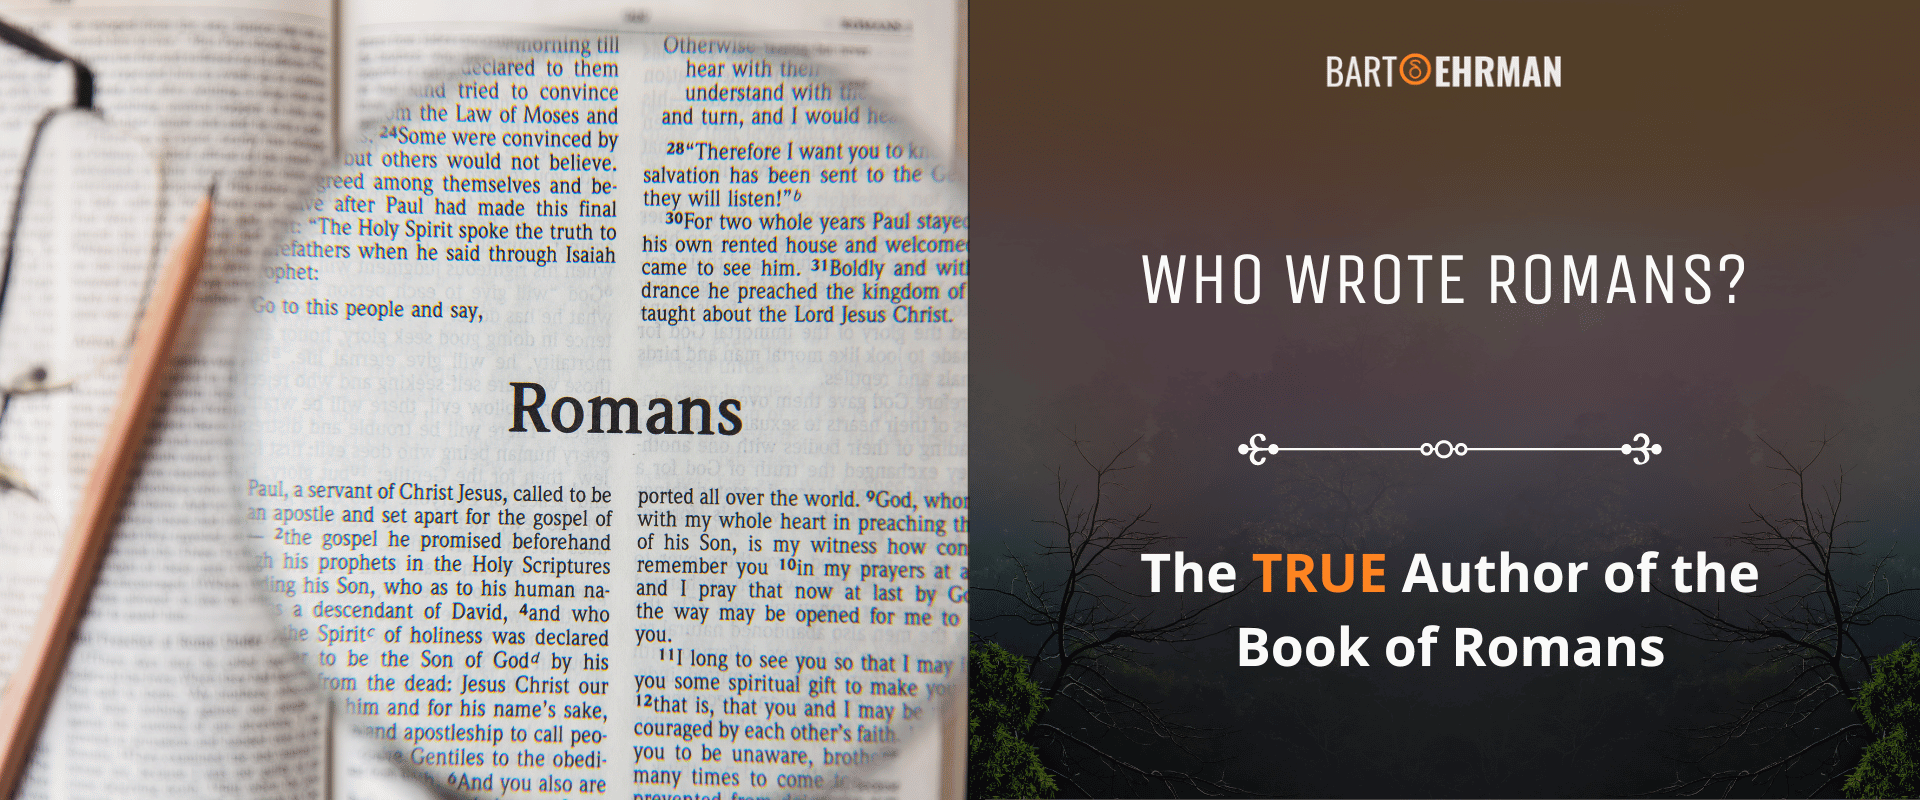 Who Wrote Romans_ The TRUE Author of the Book of Romans